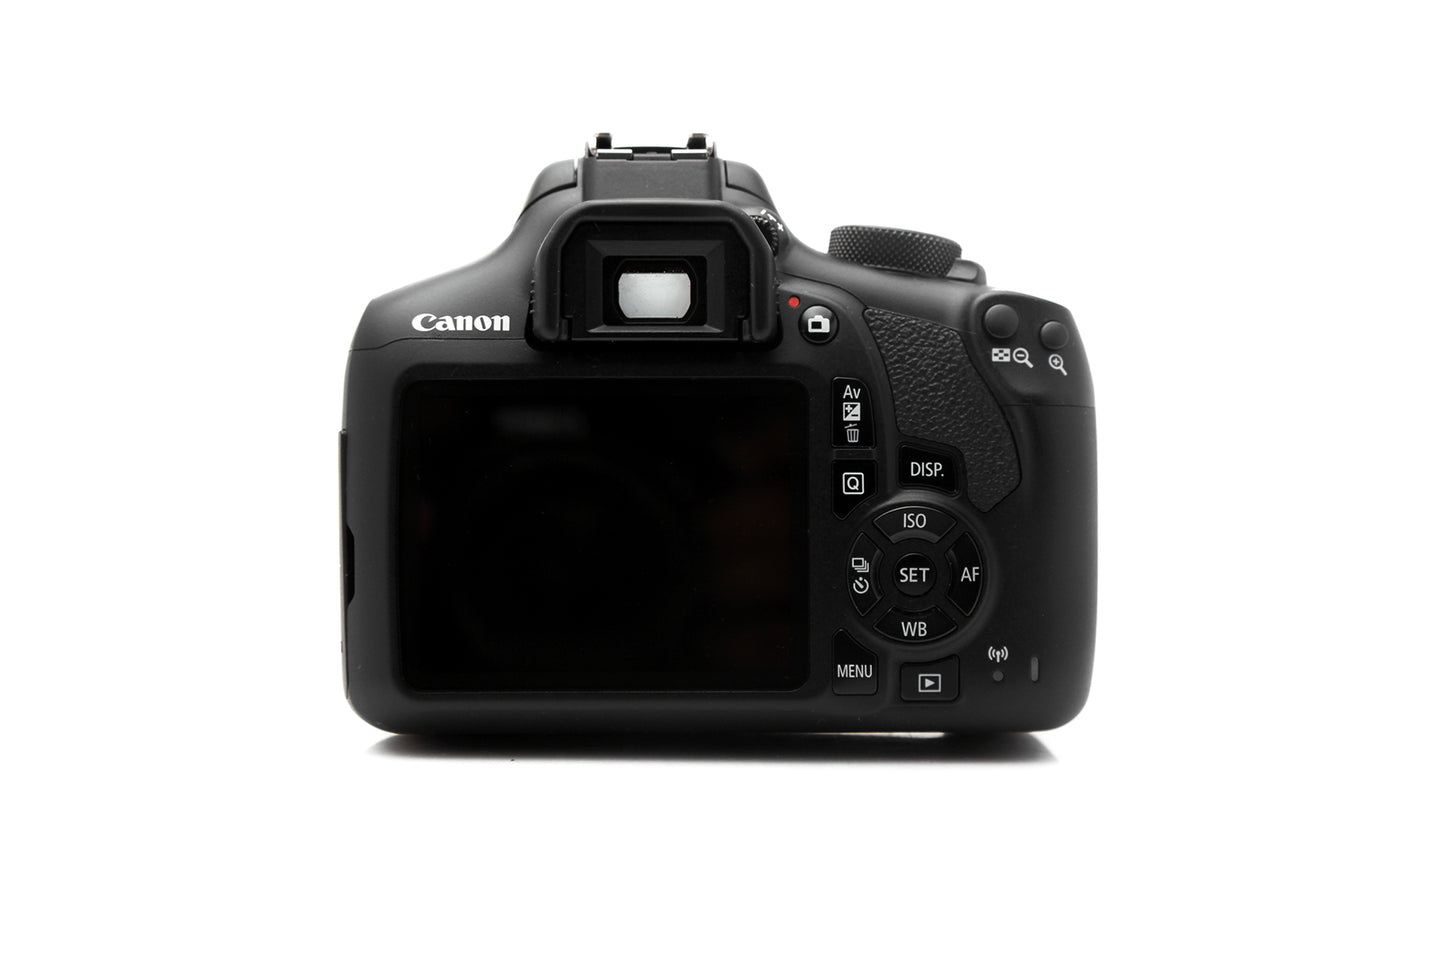 Used Canon 1300D (Rebel T6) Camera With 18-55mm Lens